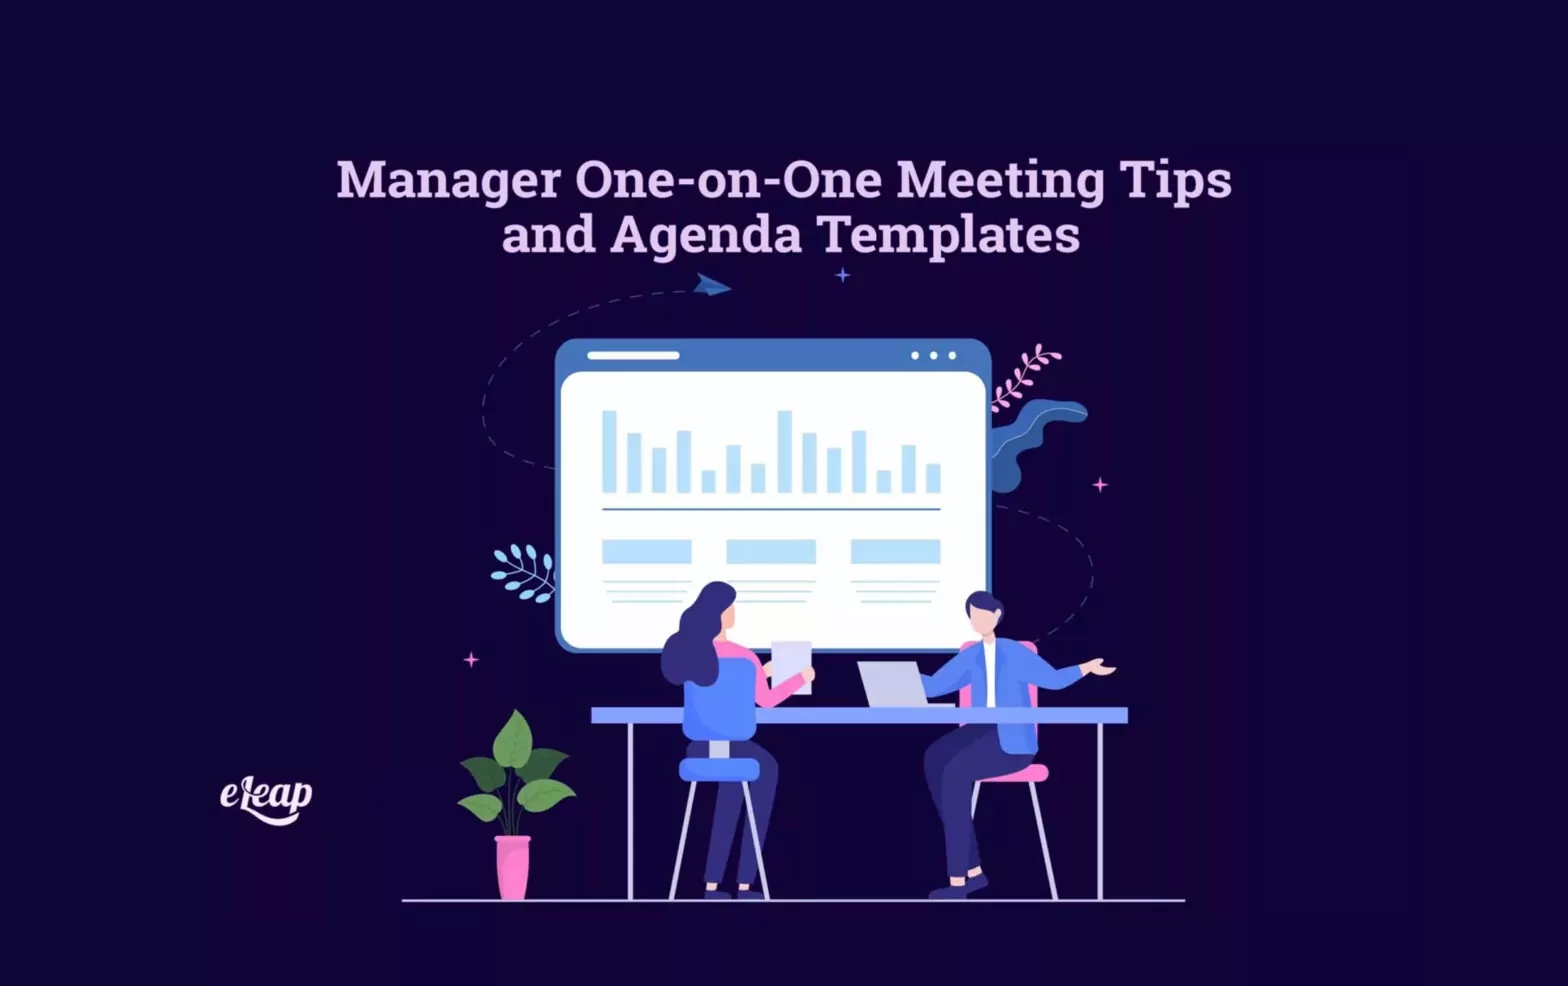 Manager One-on-One Meeting Tips and Agenda Templates